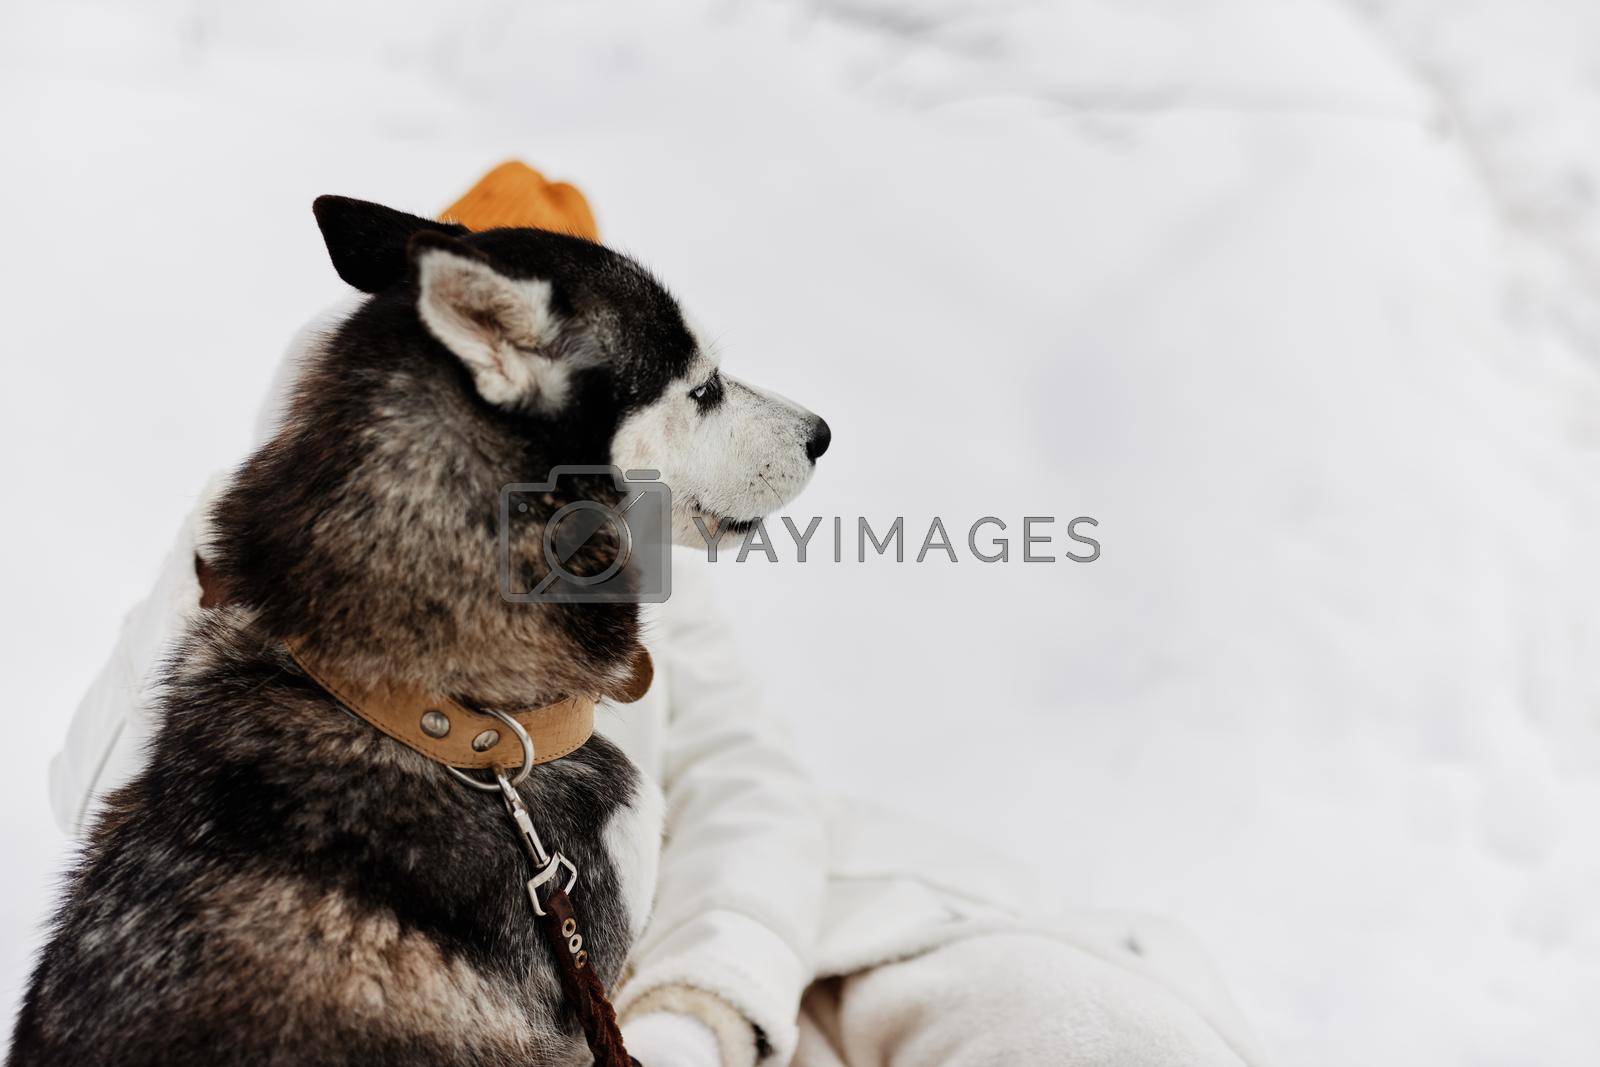 young woman in the snow playing with a dog fun friendship Lifestyle. High quality photo